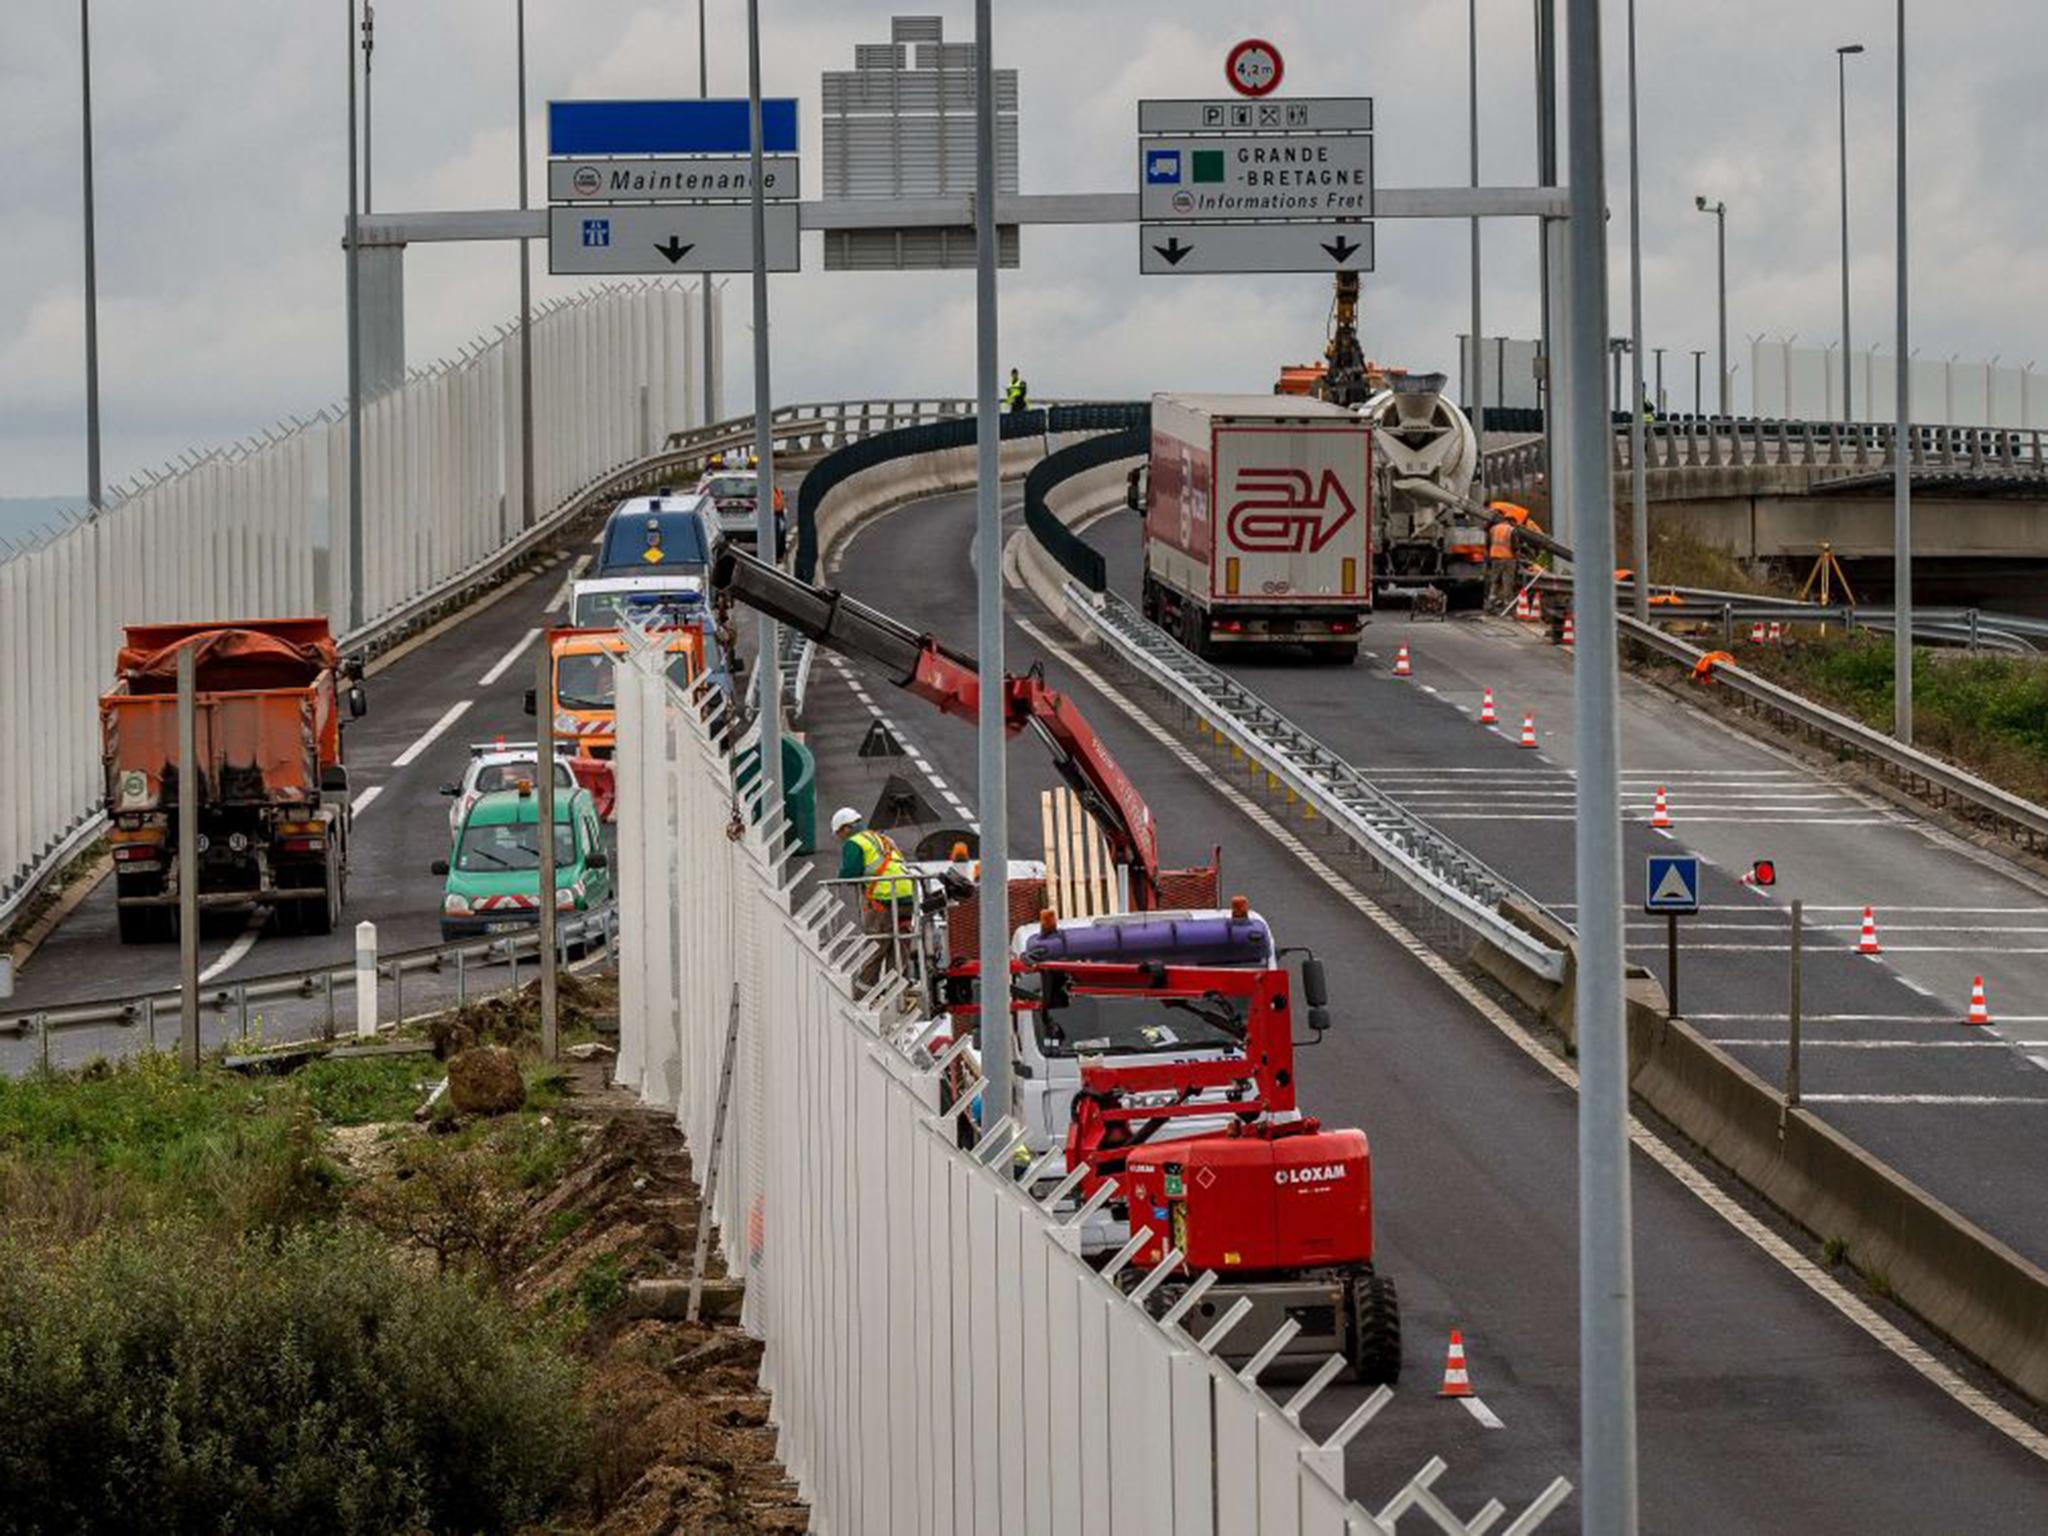 Workers install seven-metre high fencing along the access route to the Eurotunnel in Coquelles to try and prevent migrants from attempting to cross the Channel to Britain